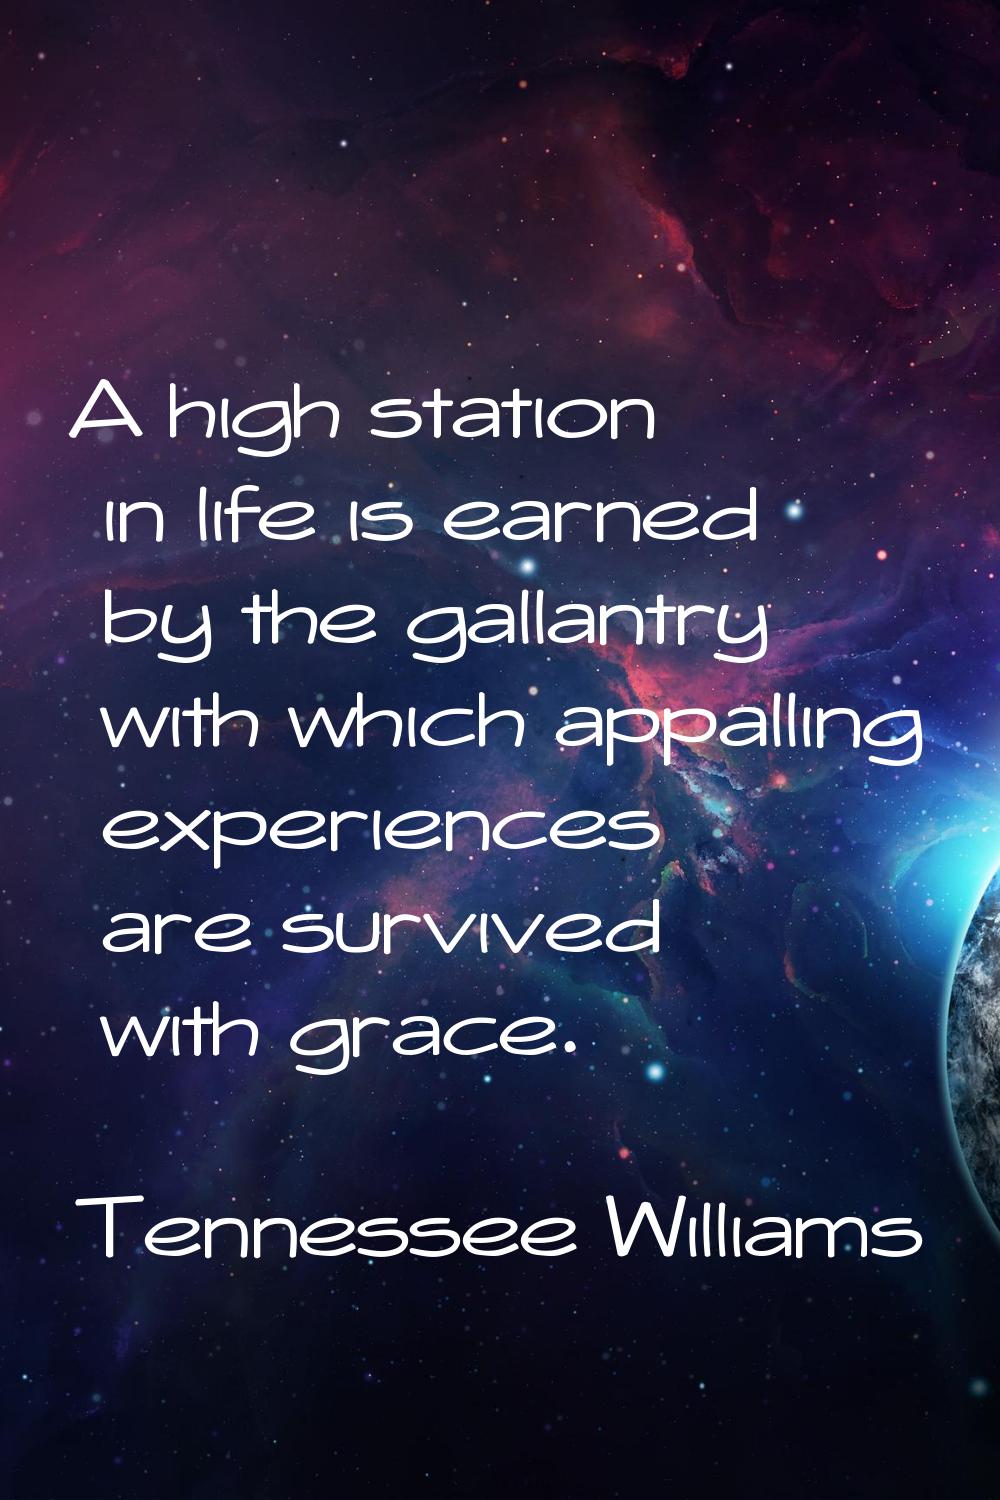 A high station in life is earned by the gallantry with which appalling experiences are survived wit